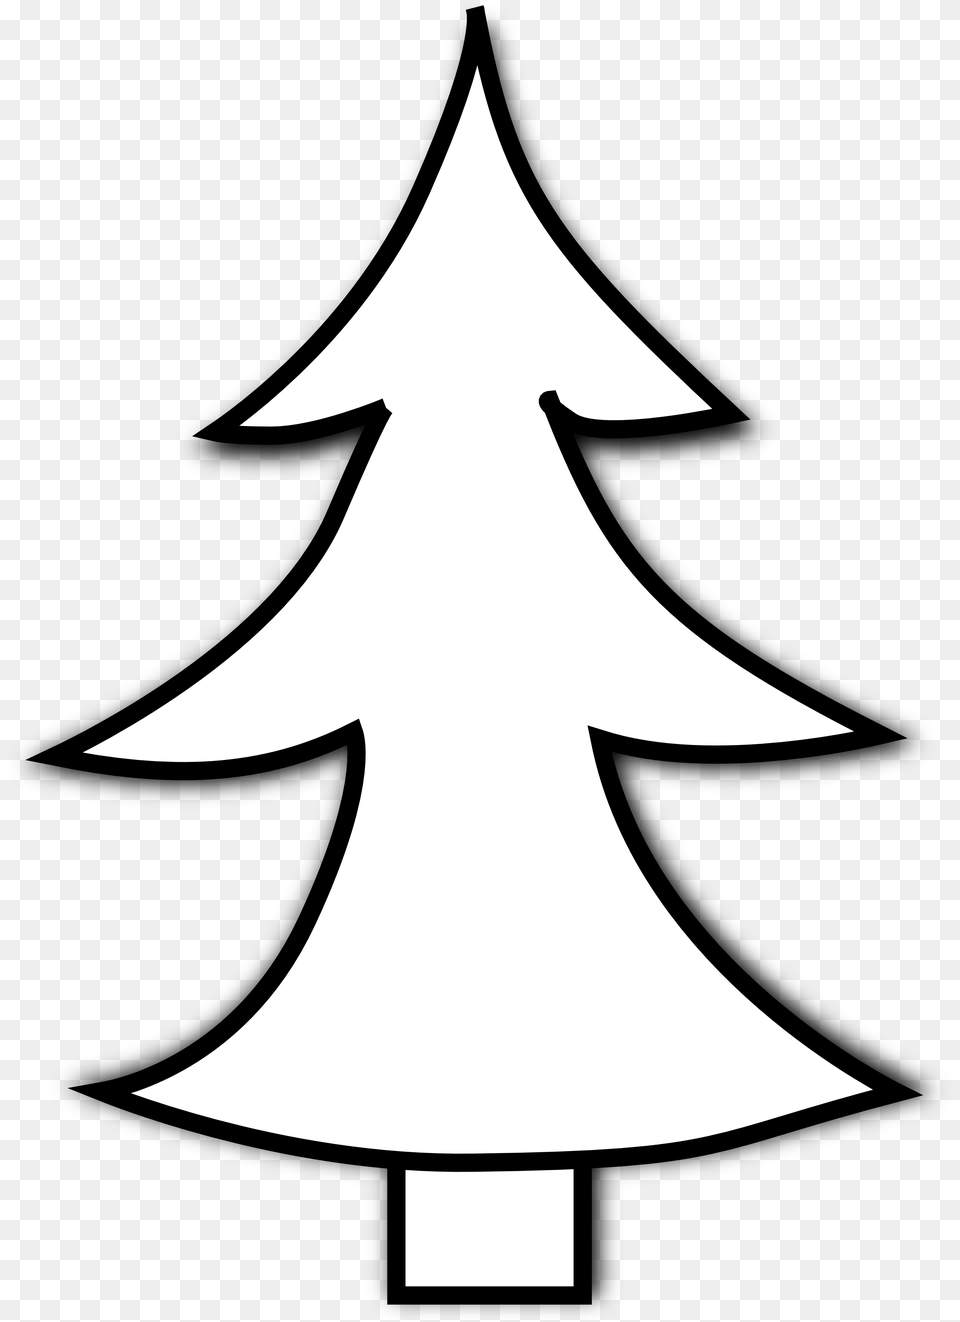 Christmas Tree Black And White, Bow, Stencil, Weapon, Christmas Decorations Png